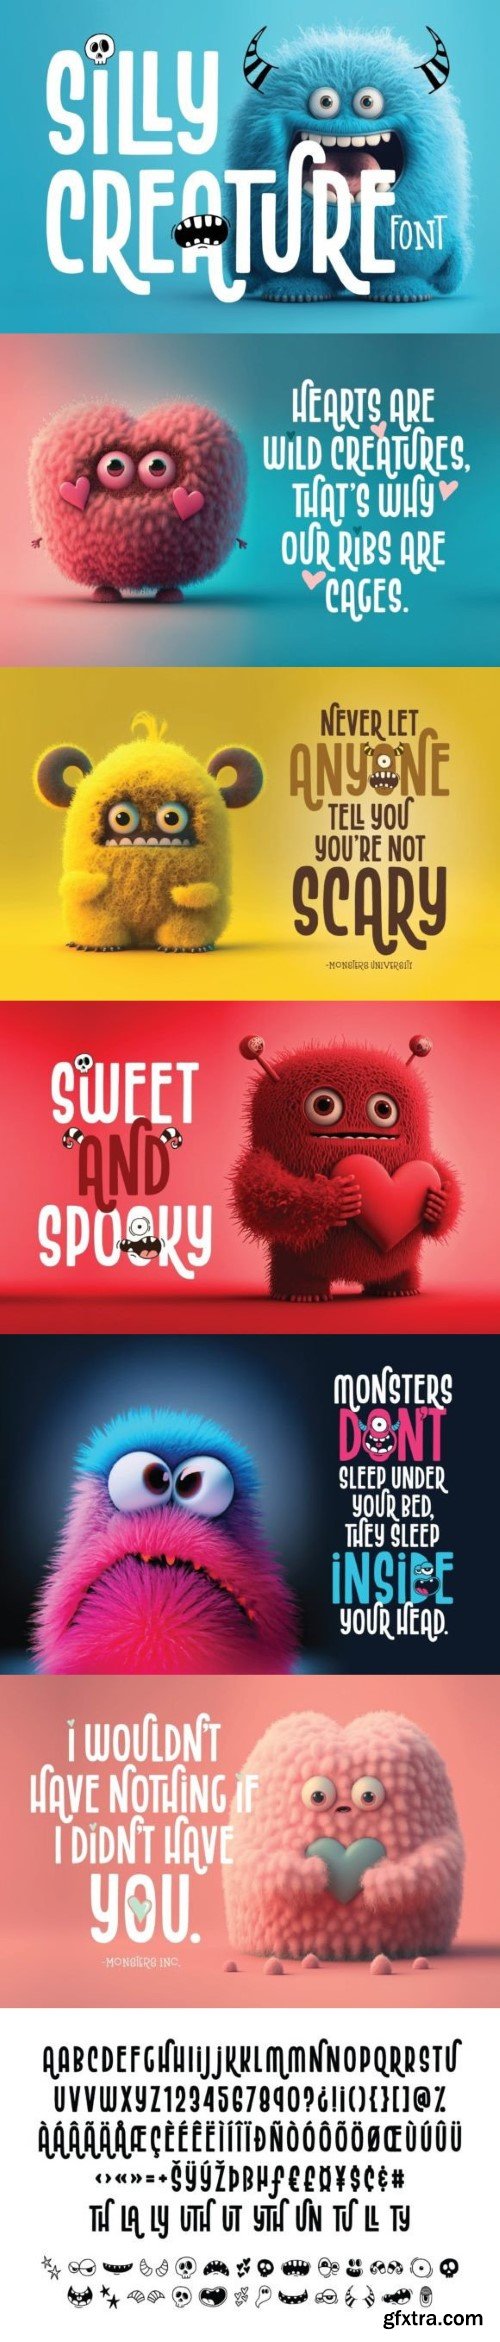 Silly Creature Font